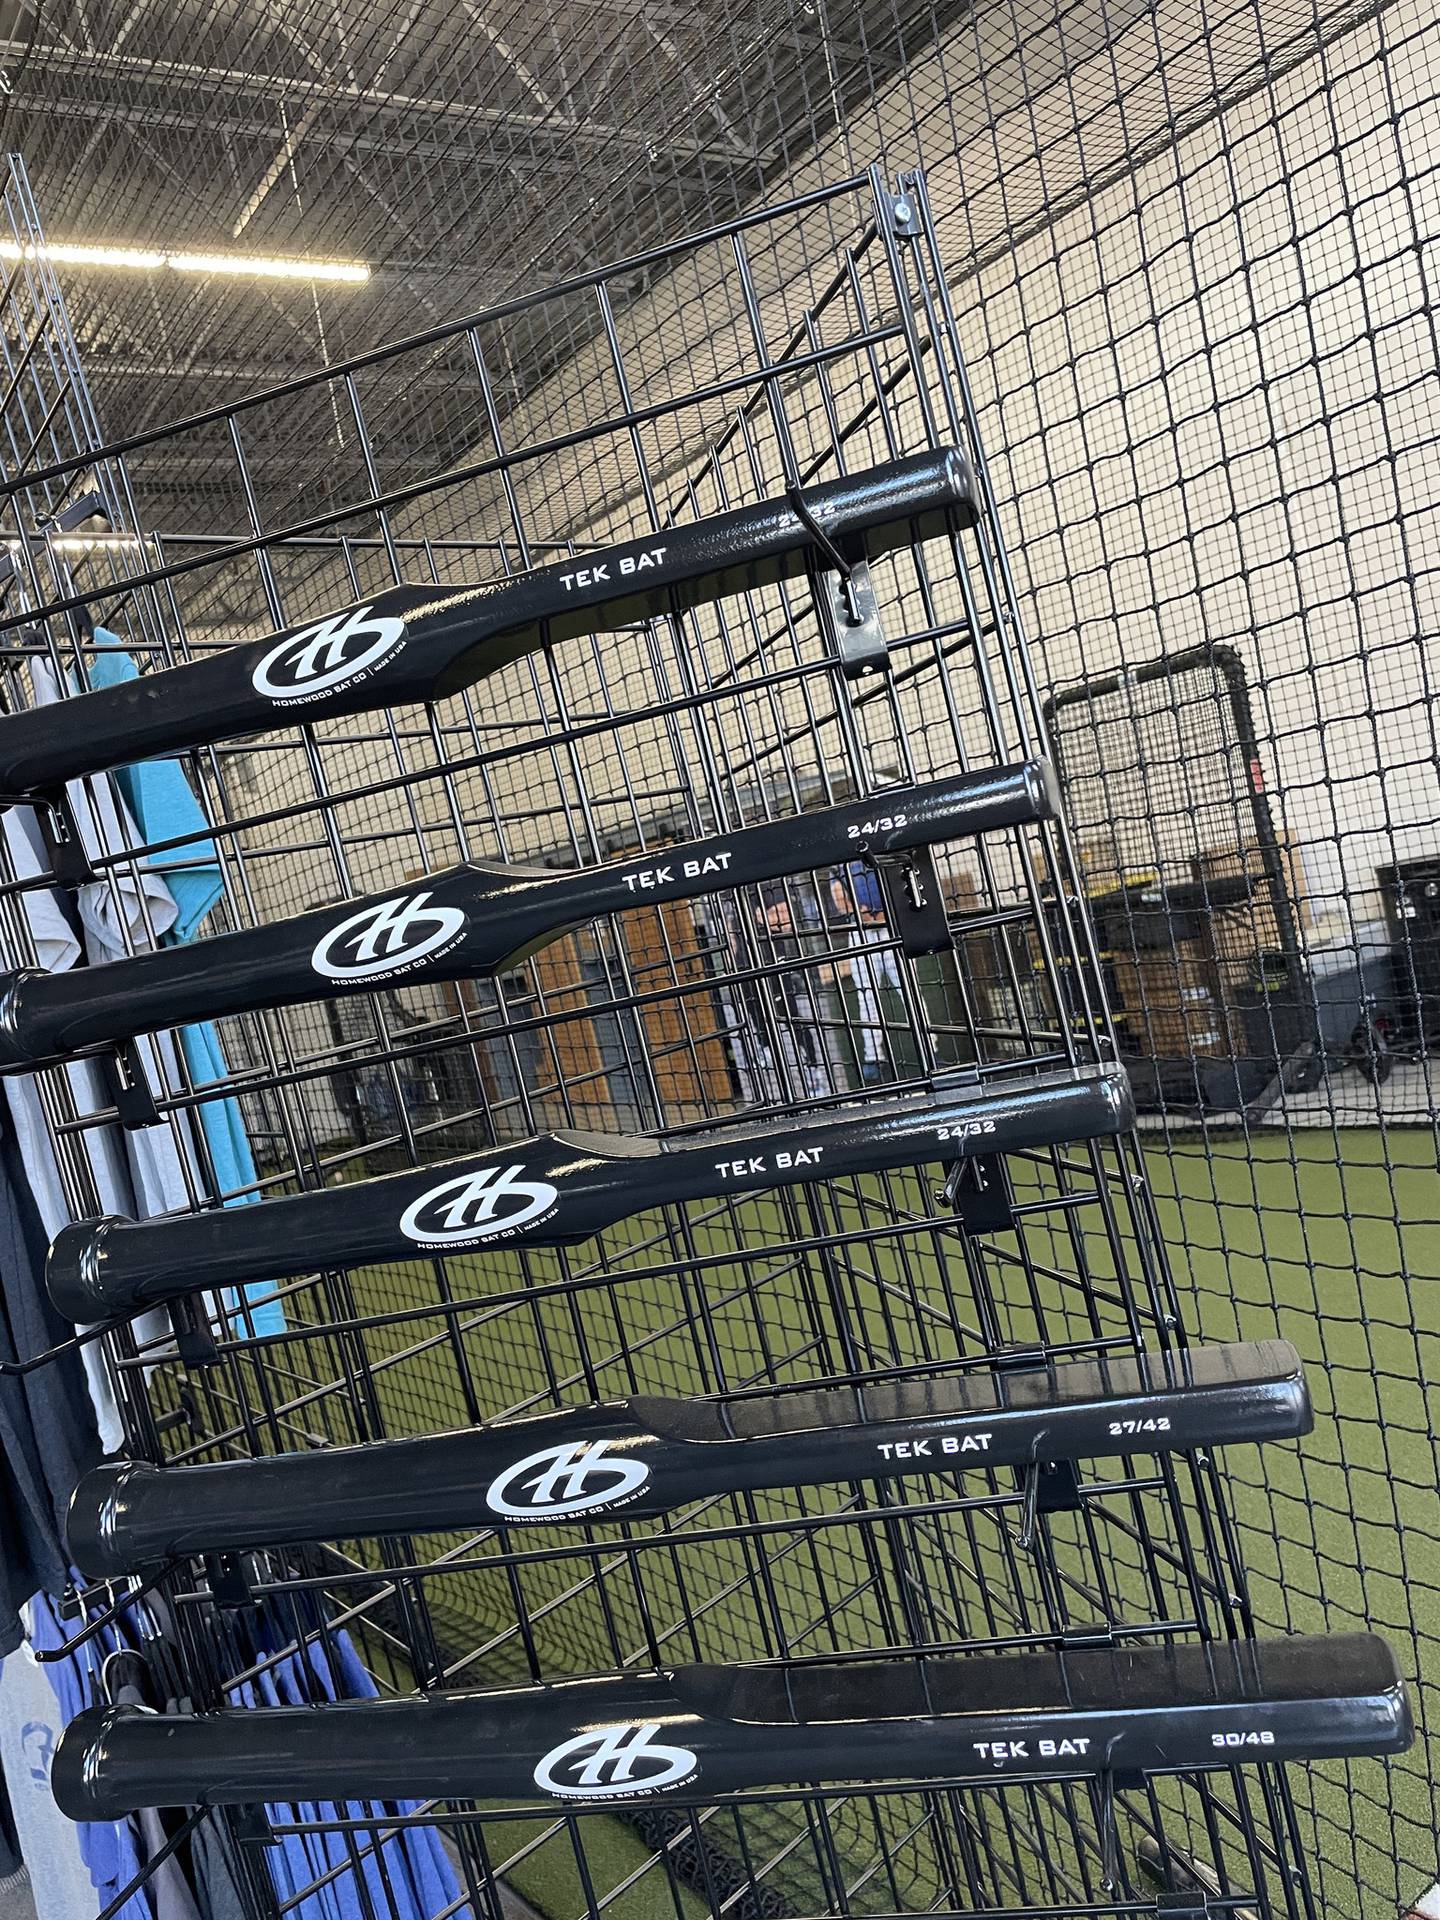 Among the products at Homewood Bat Co. is the Tek Bat, which is shaped and weighted based on advice from trainers to help players improve their swing.